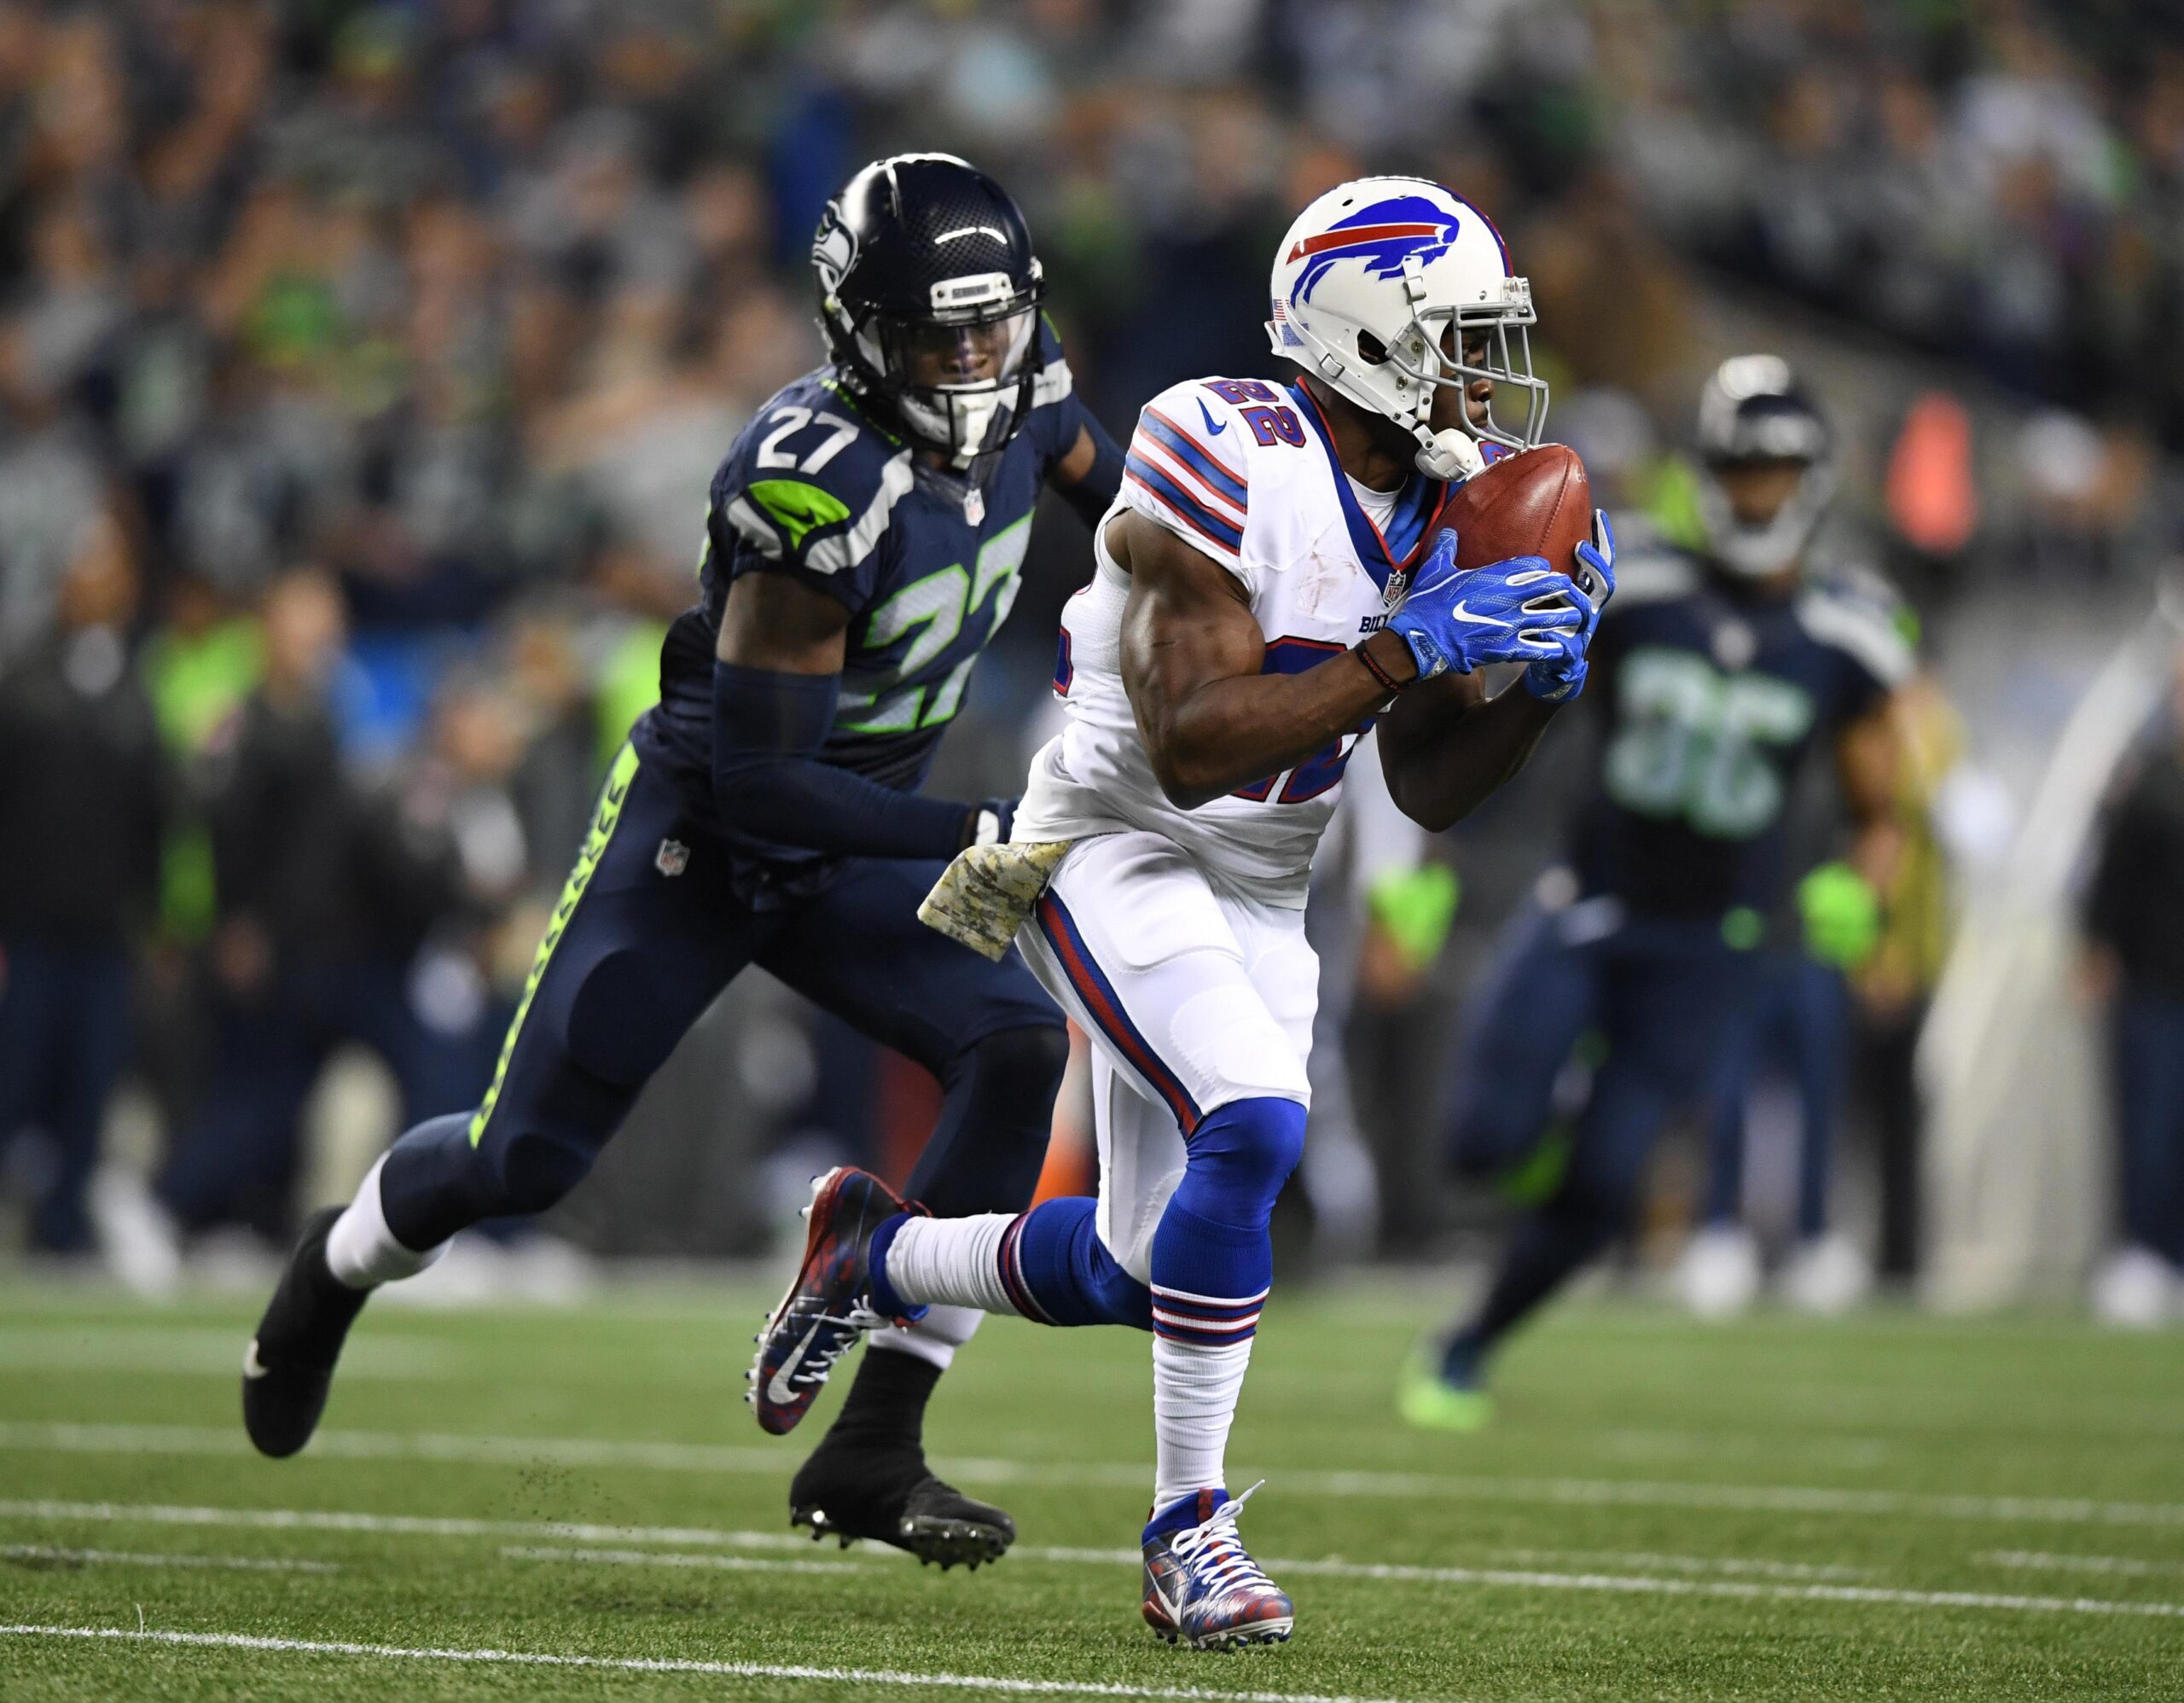 Nov 7, 2016; Seattle, WA, USA; Buffalo Bills running back Reggie Bush (22) is pursued by Seattle Seahawks cornerback Neiko Thorpe (27) on a punt return during a NFL football game at CenturyLink Field. The Seahawks defeated the Bills 31-25. Mandatory Credit: Kirby Lee-USA TODAY Sports